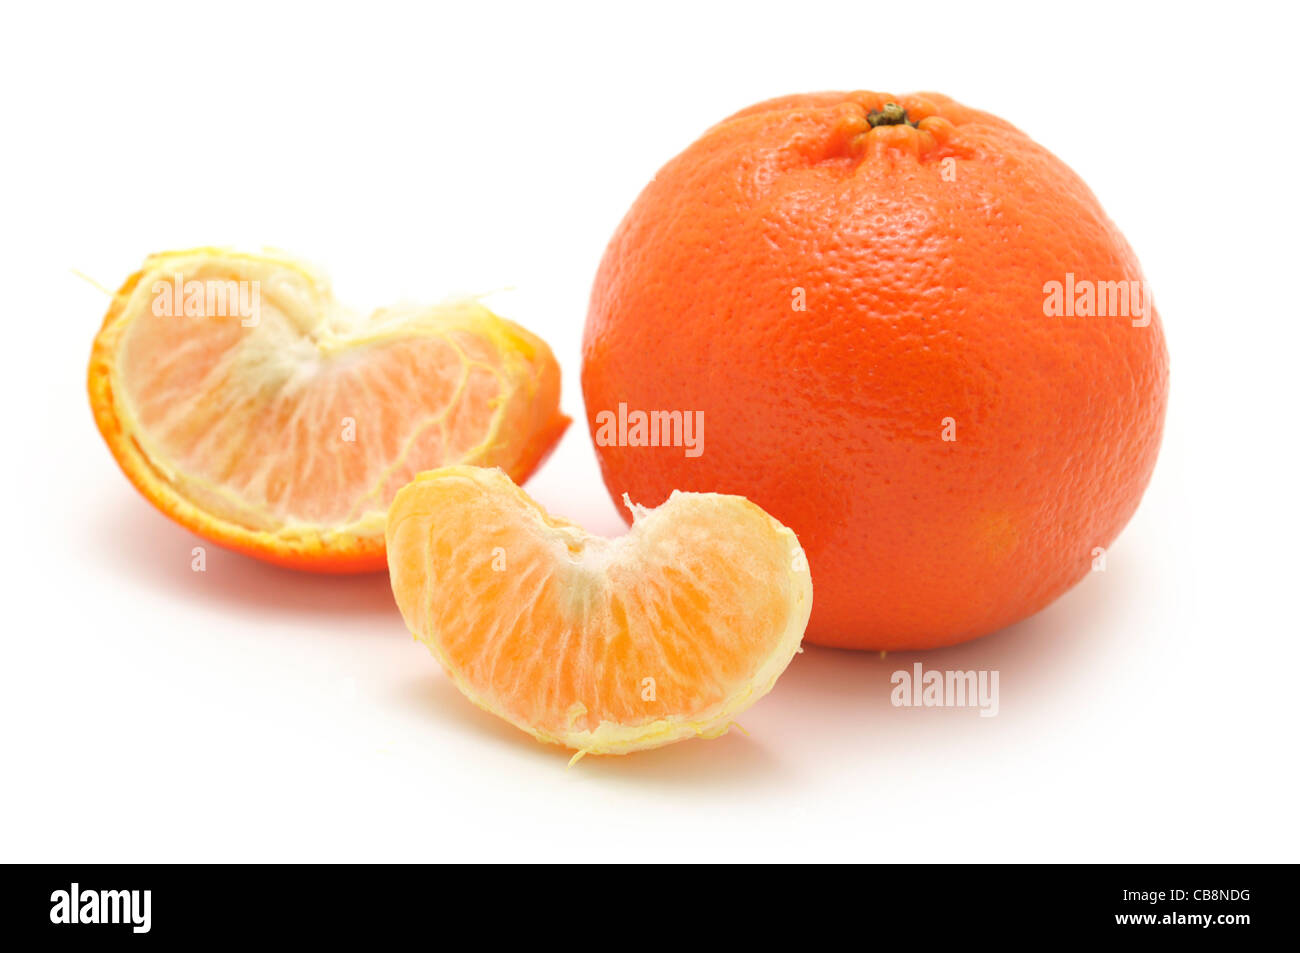 Tangerine and Tangerine Sections Stock Photo